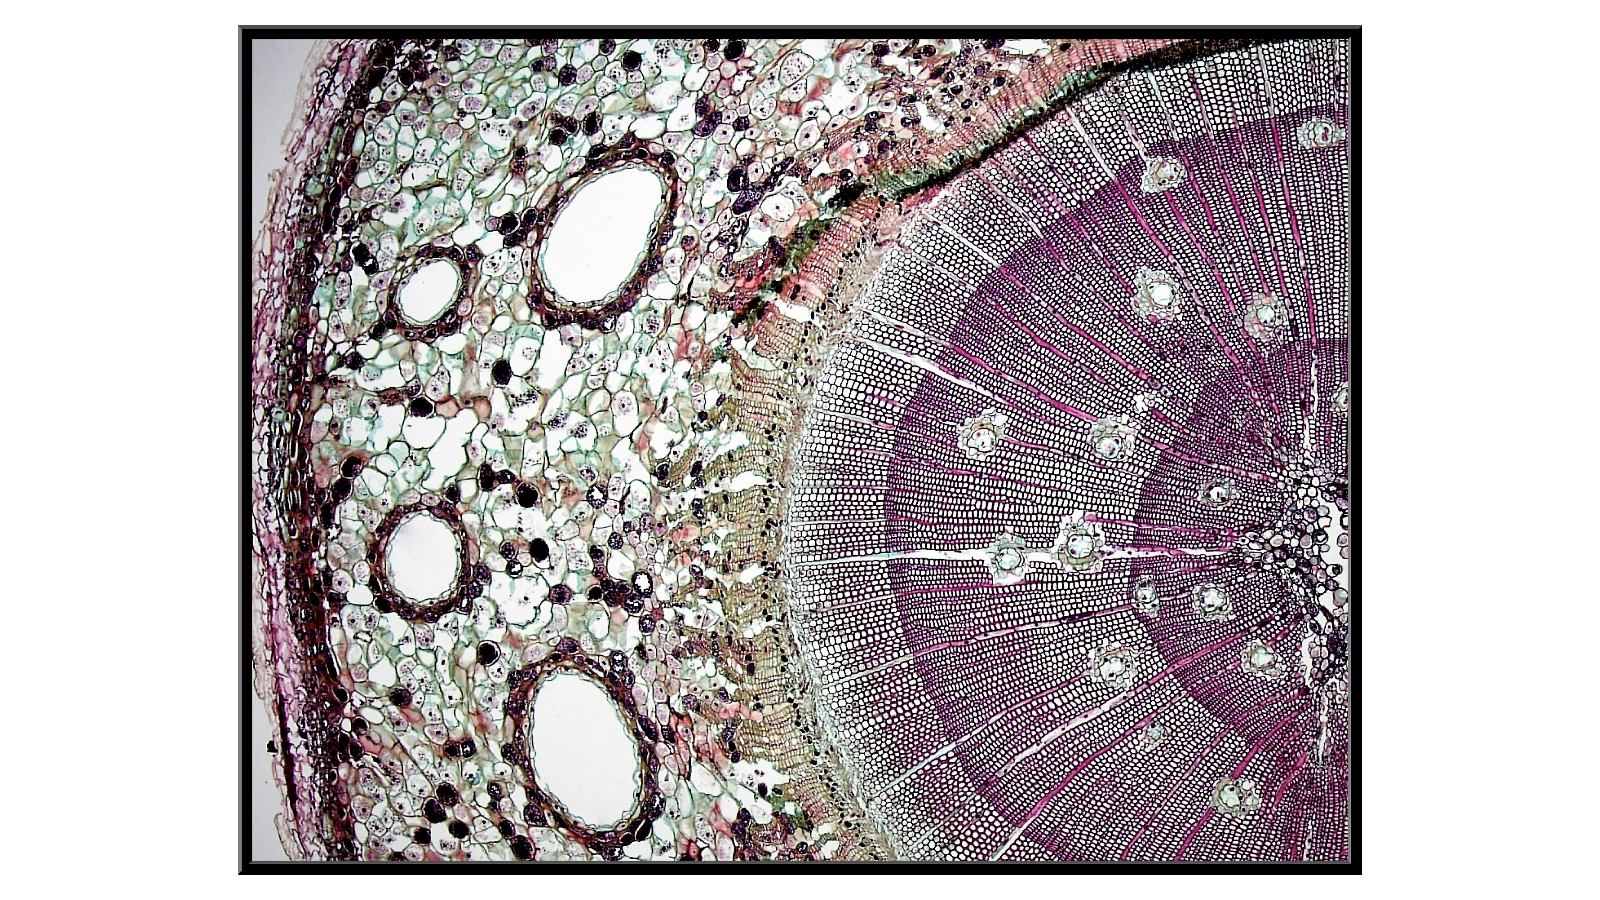 Cross-section of a 3-year-old pine stem x40